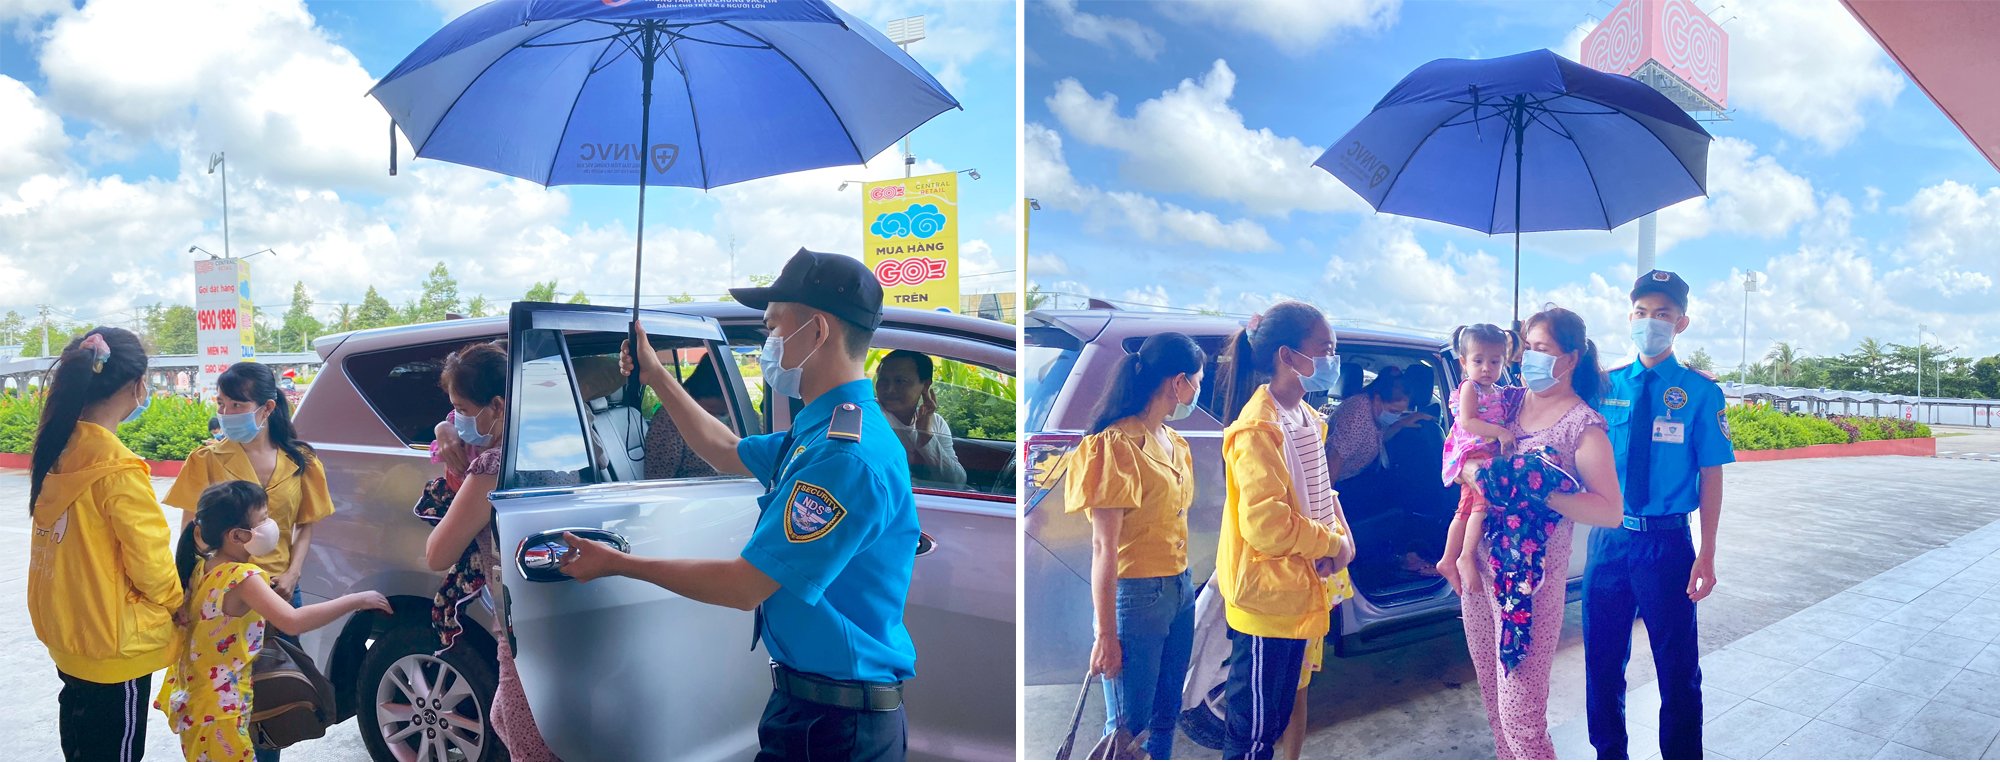 Security guards umbrella for children and adults when coming to the vaccination center 